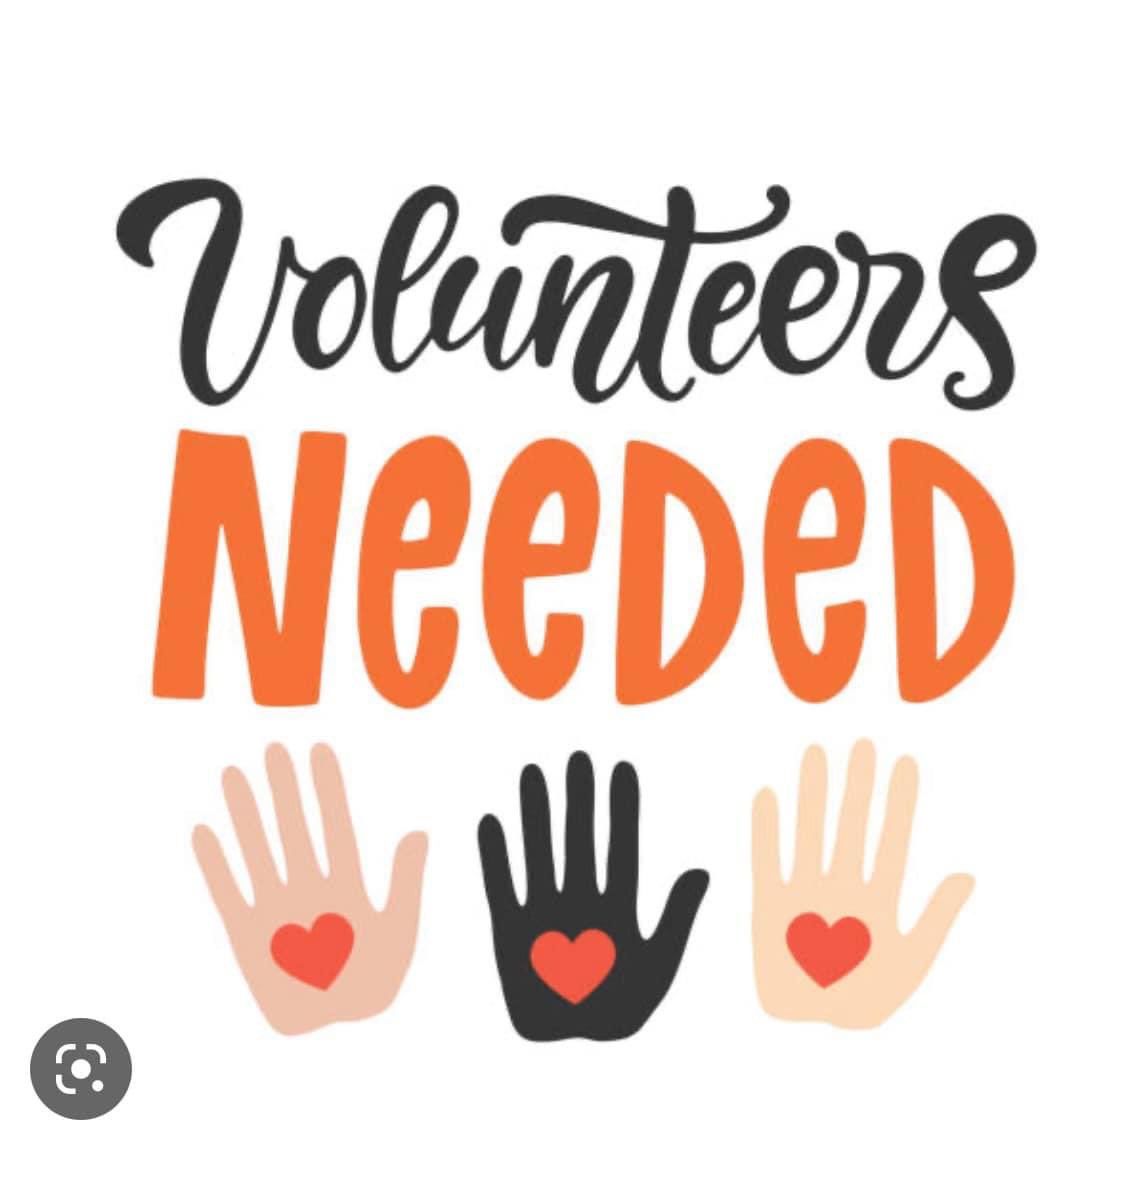 We are looking for volunteers to help at our upcoming Foodbank drive at @asdasinfin on the 17th-19th May if you can spare some time to help call 01332346266 or email info@df4ta.com @MarketingDerby @DerbyCC @DerbyHomes @BBCRadioDerby @love_derby